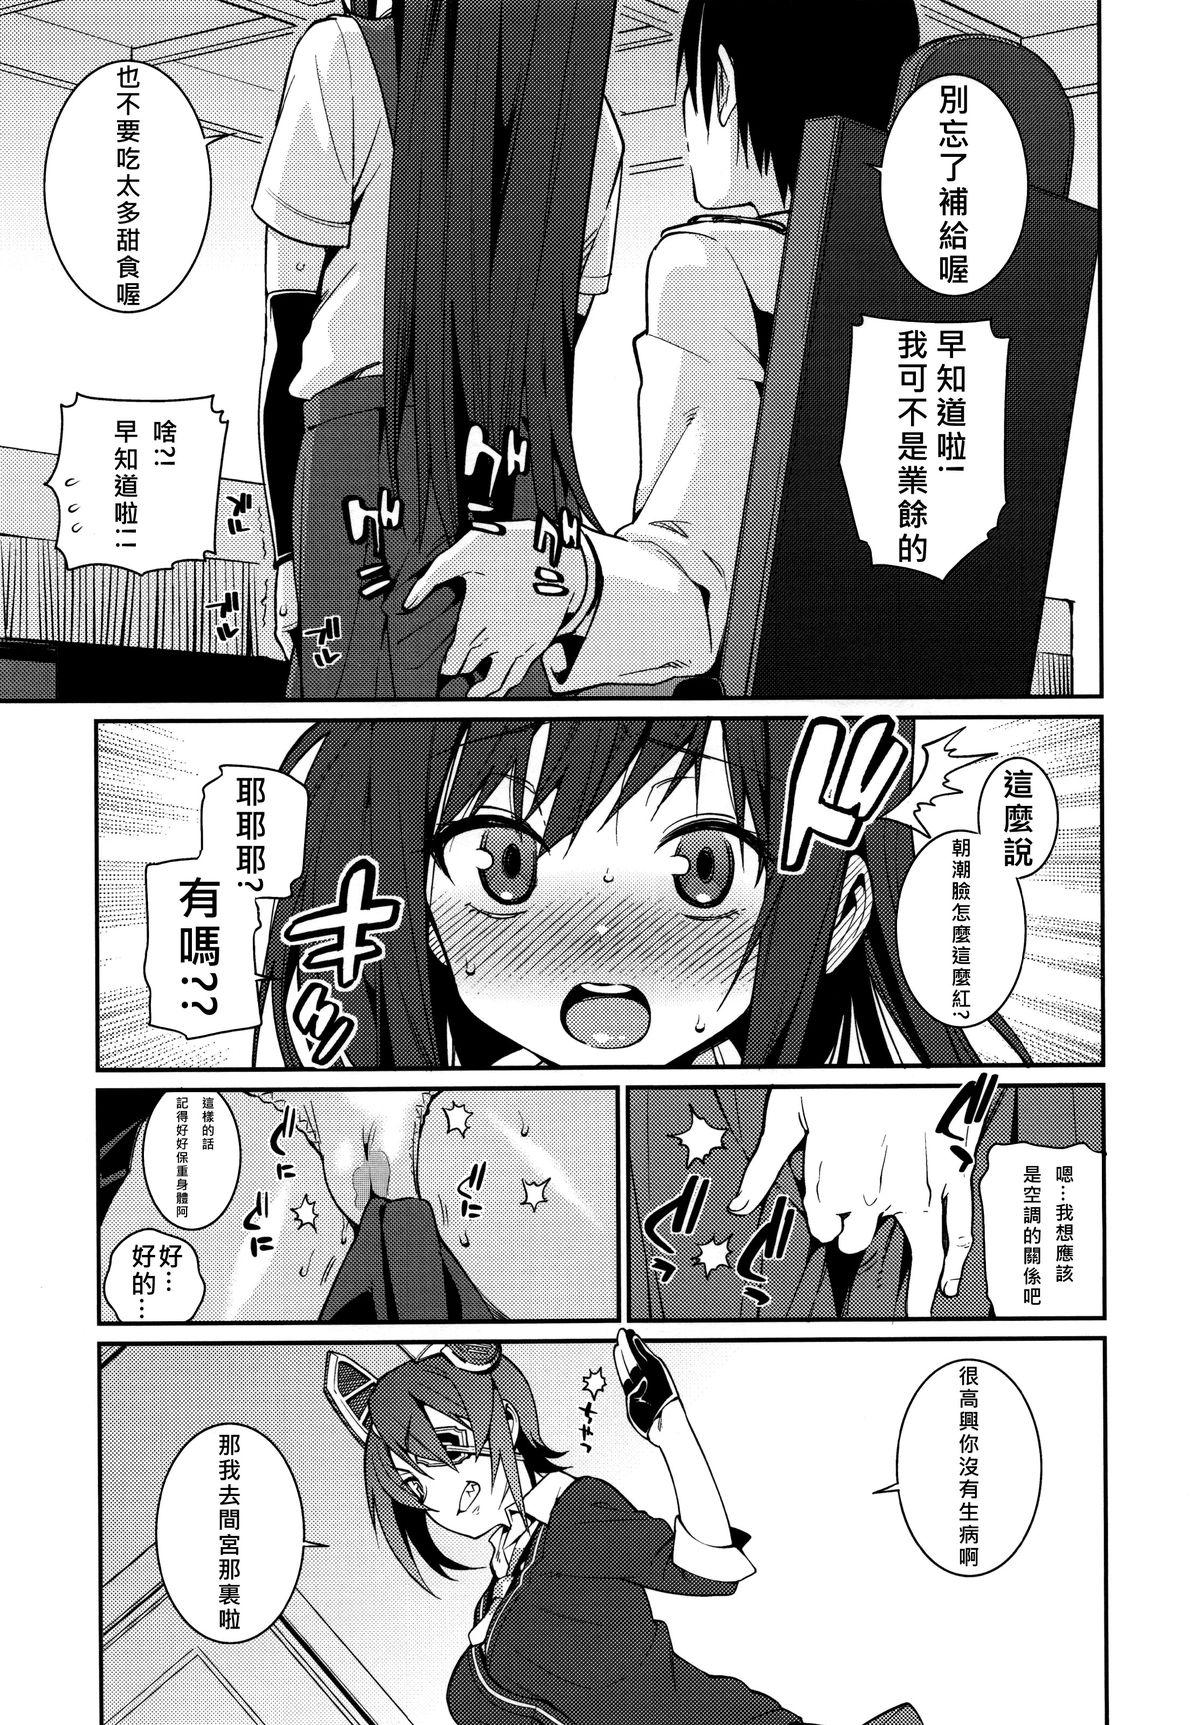 Com BRIEFINGS - Kantai collection Missionary Position Porn - Page 9